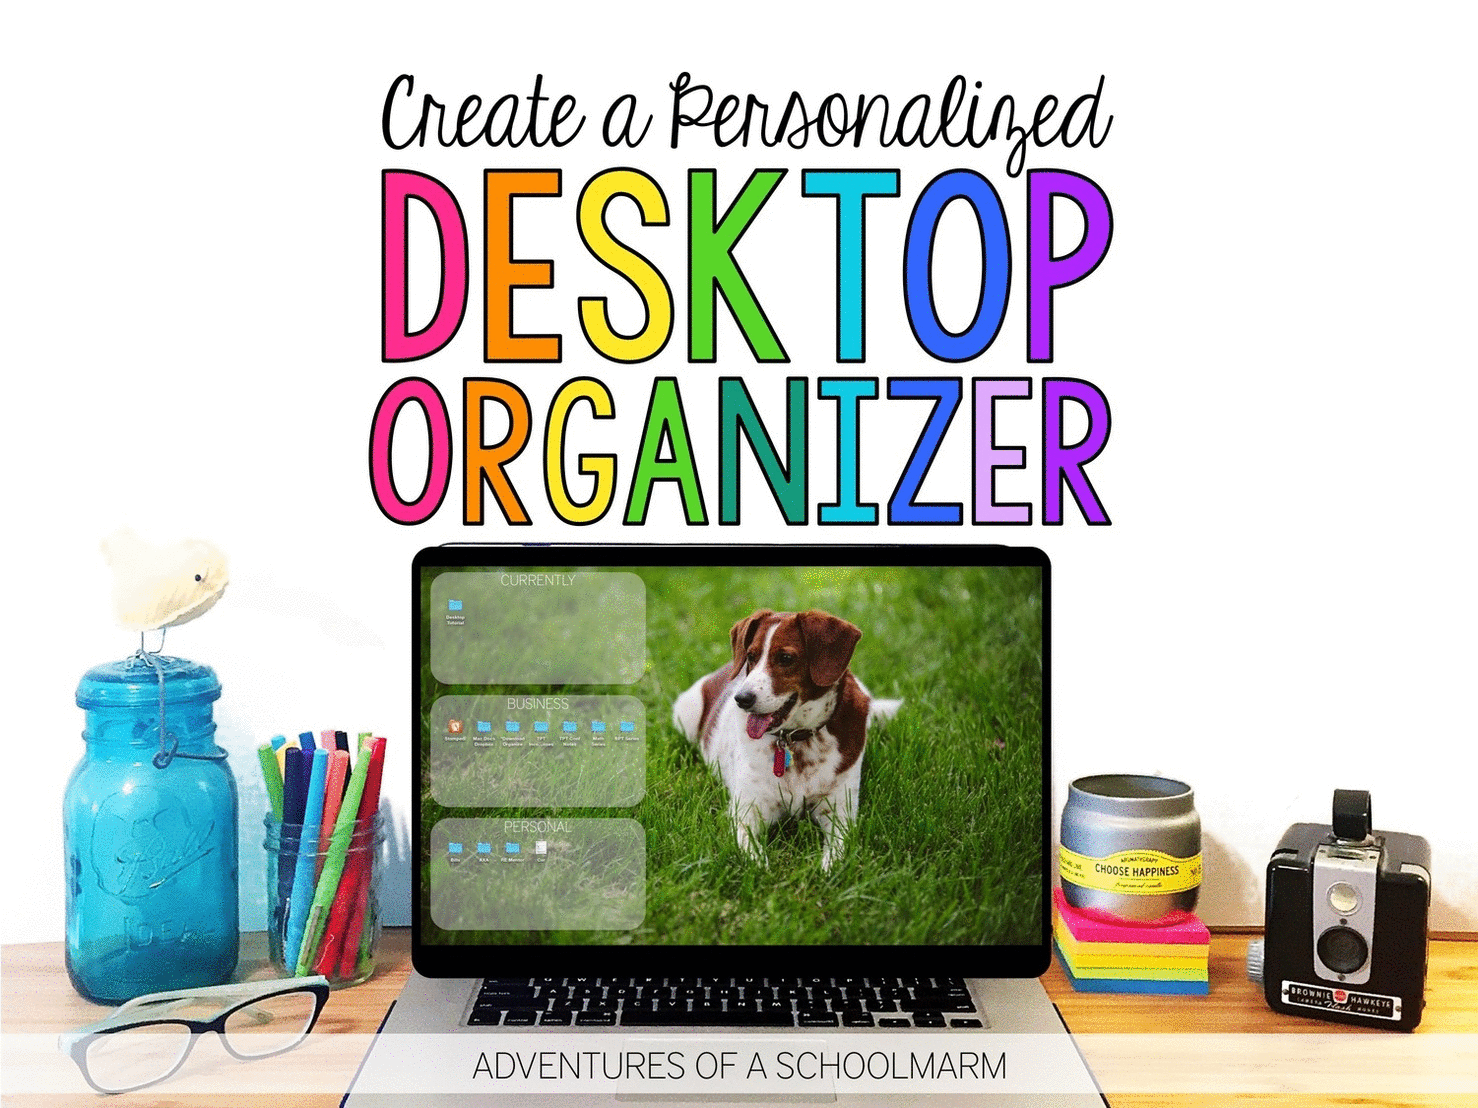 Are you tired of having the same desktop organizer on your computer for too long? Use this tutorial to create a custom wallpaper slideshow that will automatically cycle through all of your favorite photos.